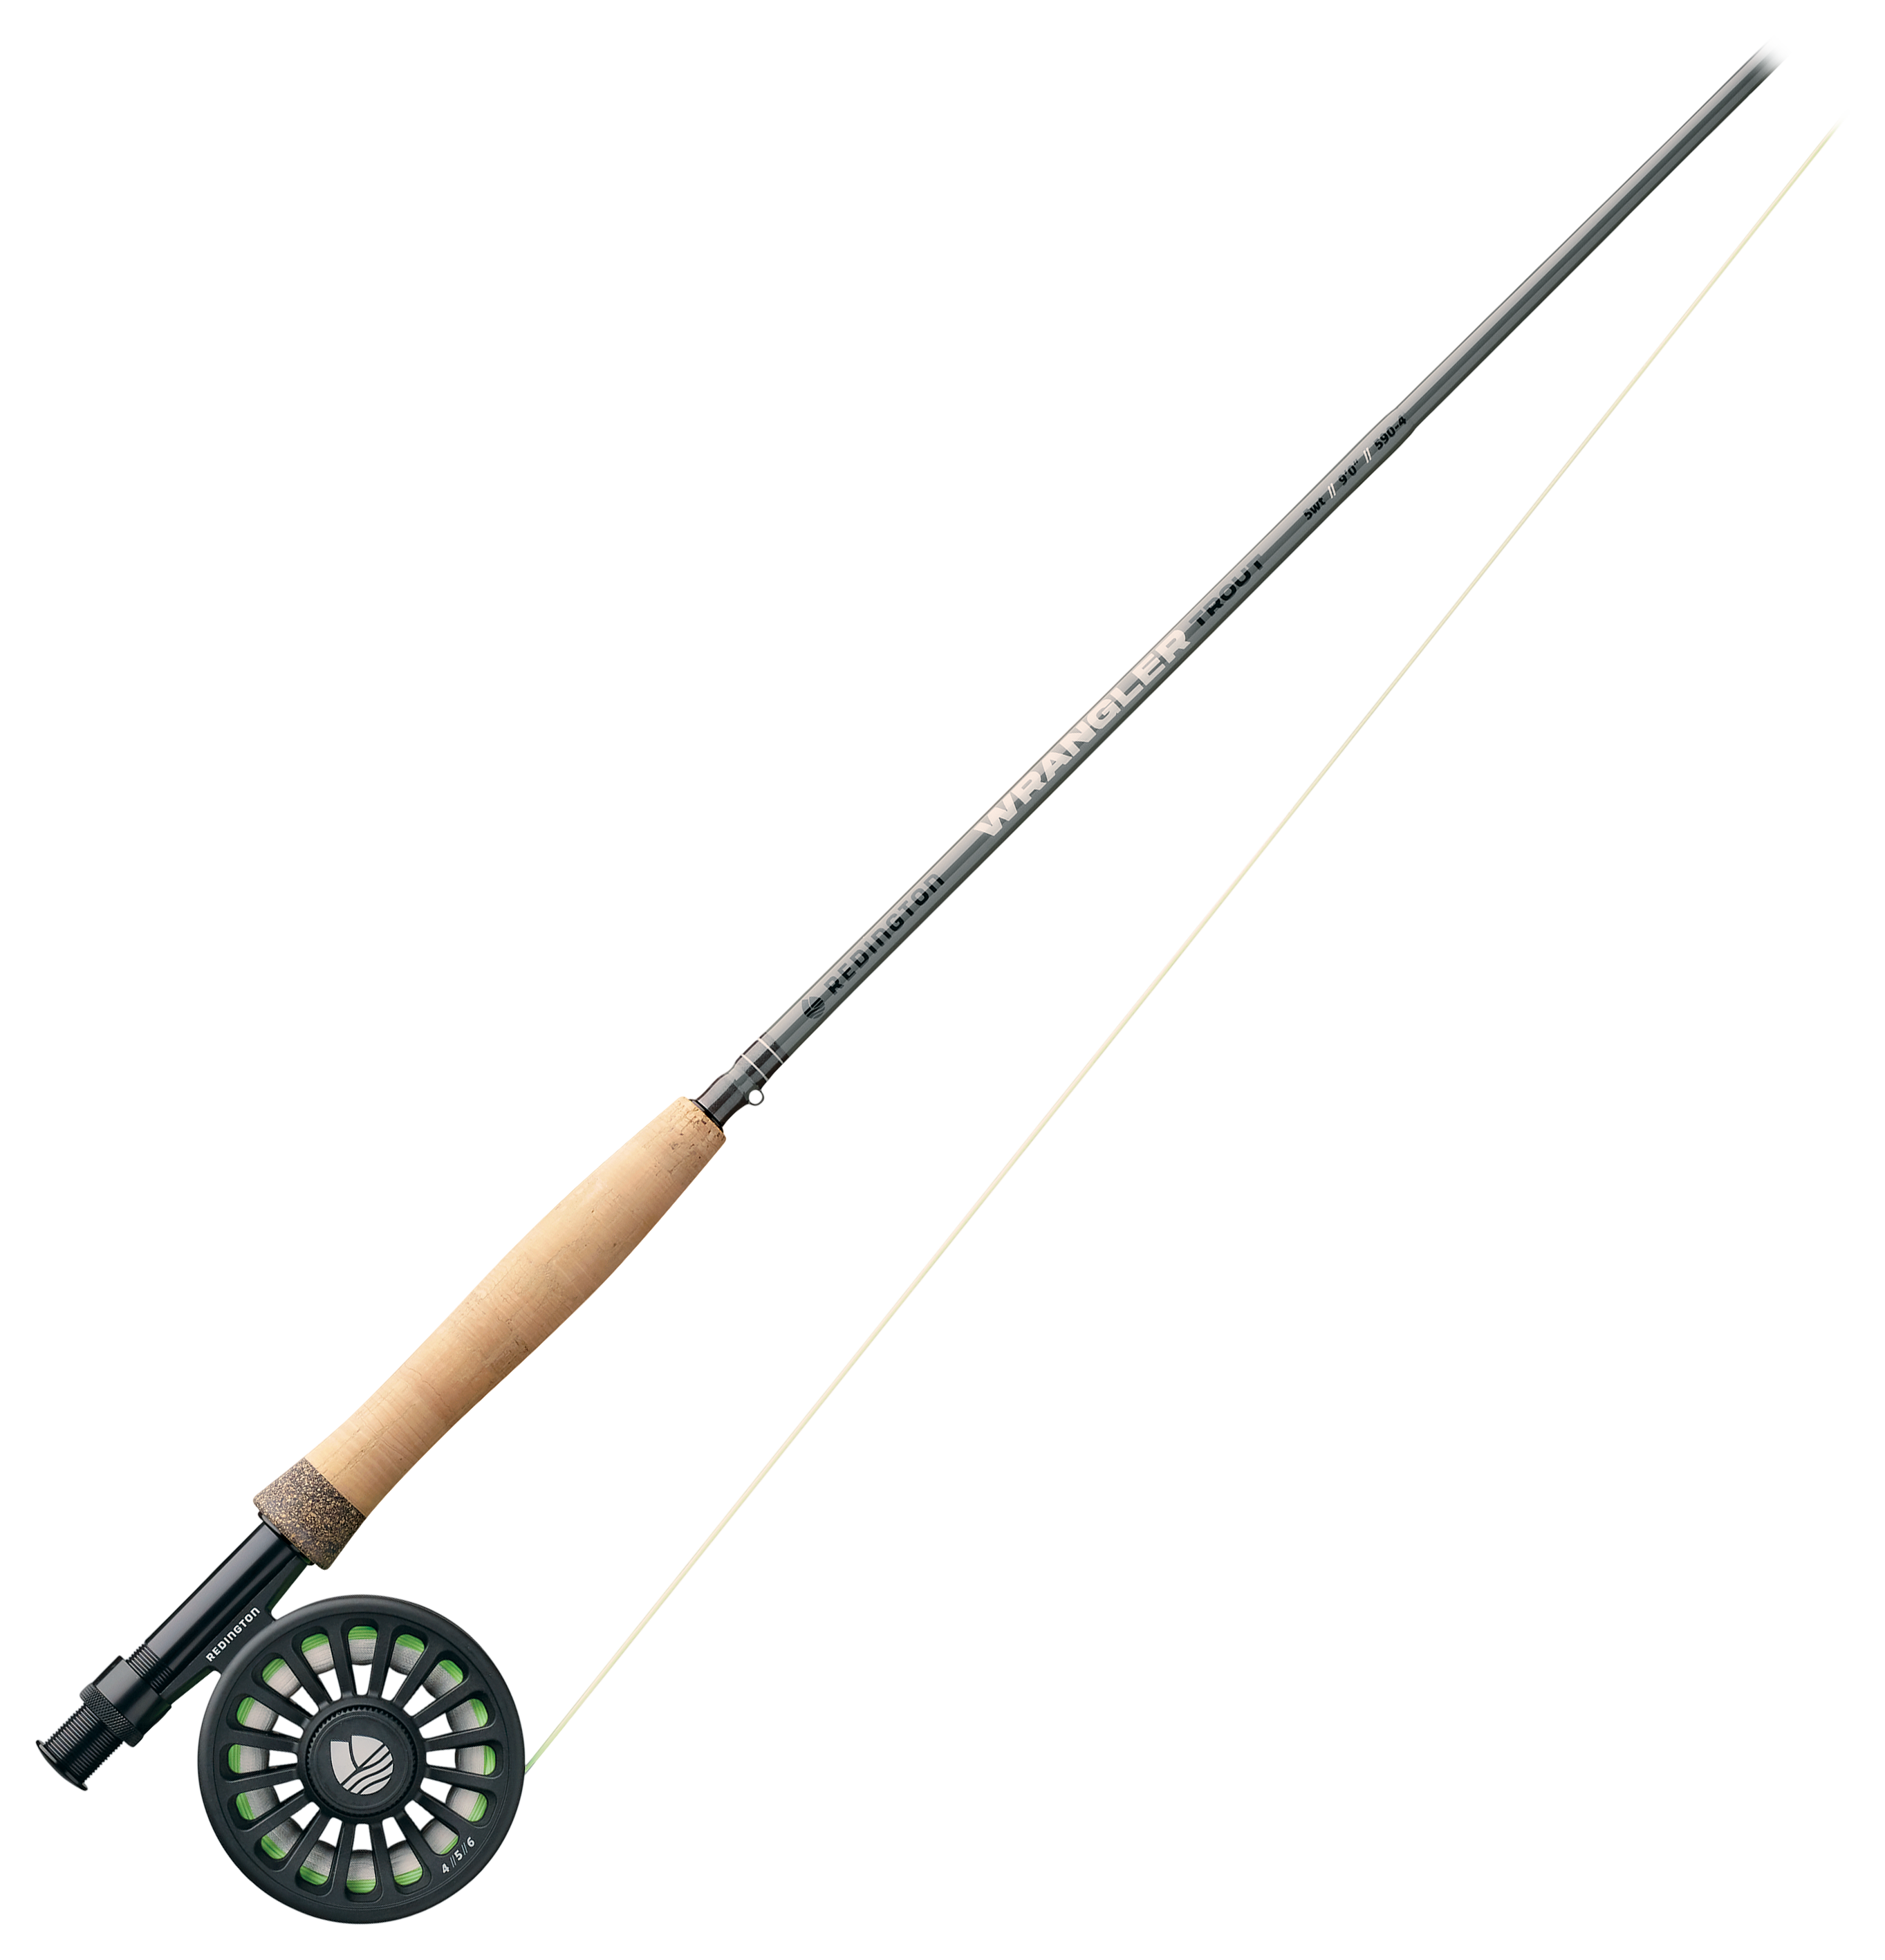 Encounter 8-weight 9' Fly Rod Outfit - North Country Angler Fly Shop -  North Conway, New Hampshire Fly Fishing Store